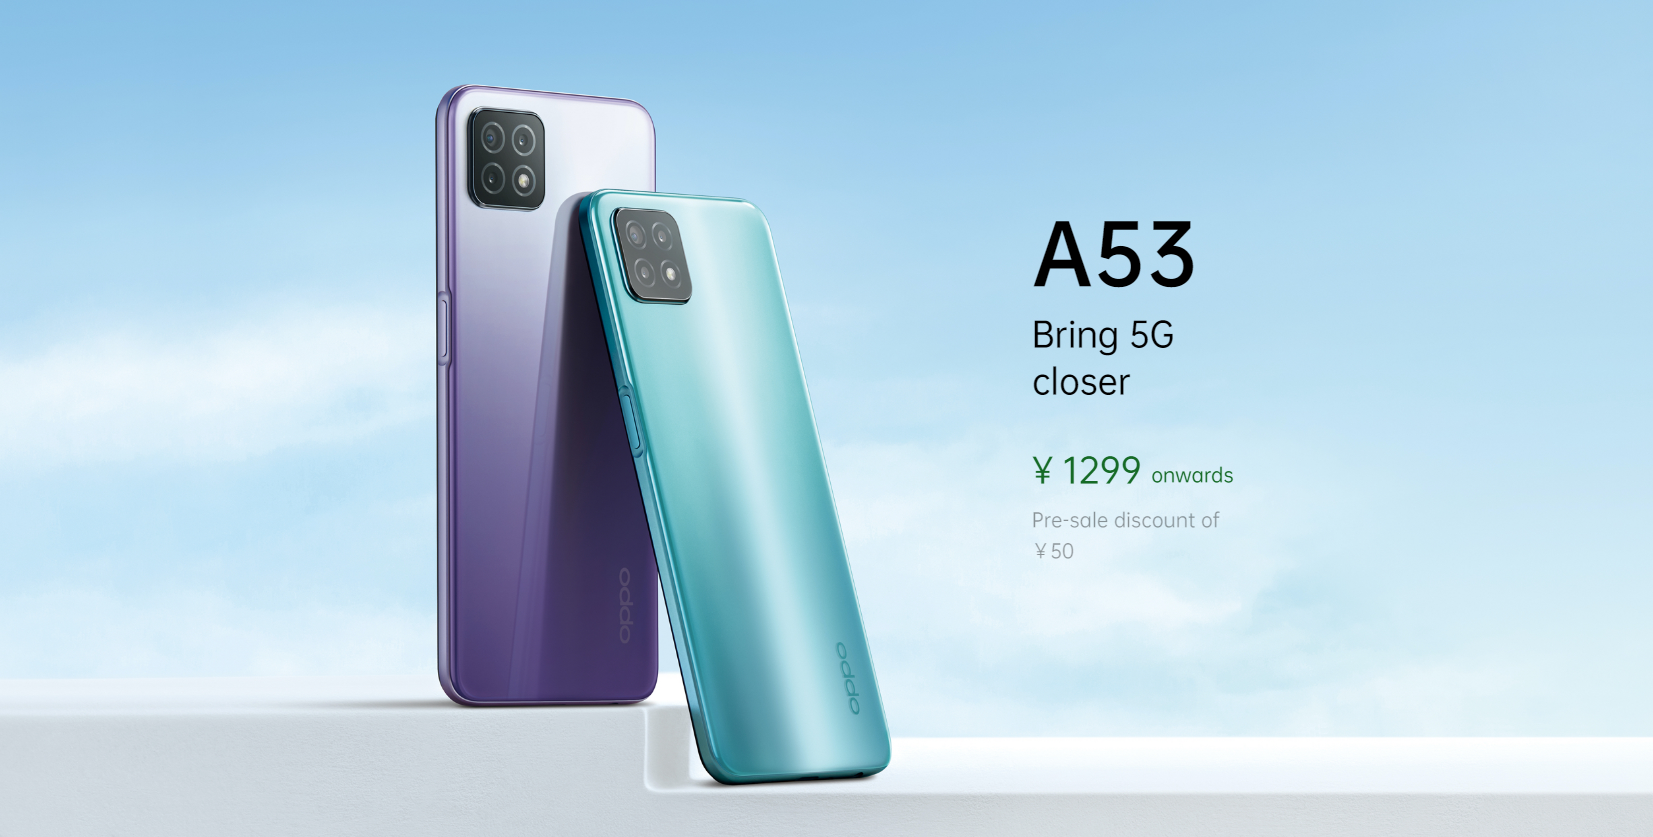 OPPO launches a new version of the budget A53 smartphone with 5G